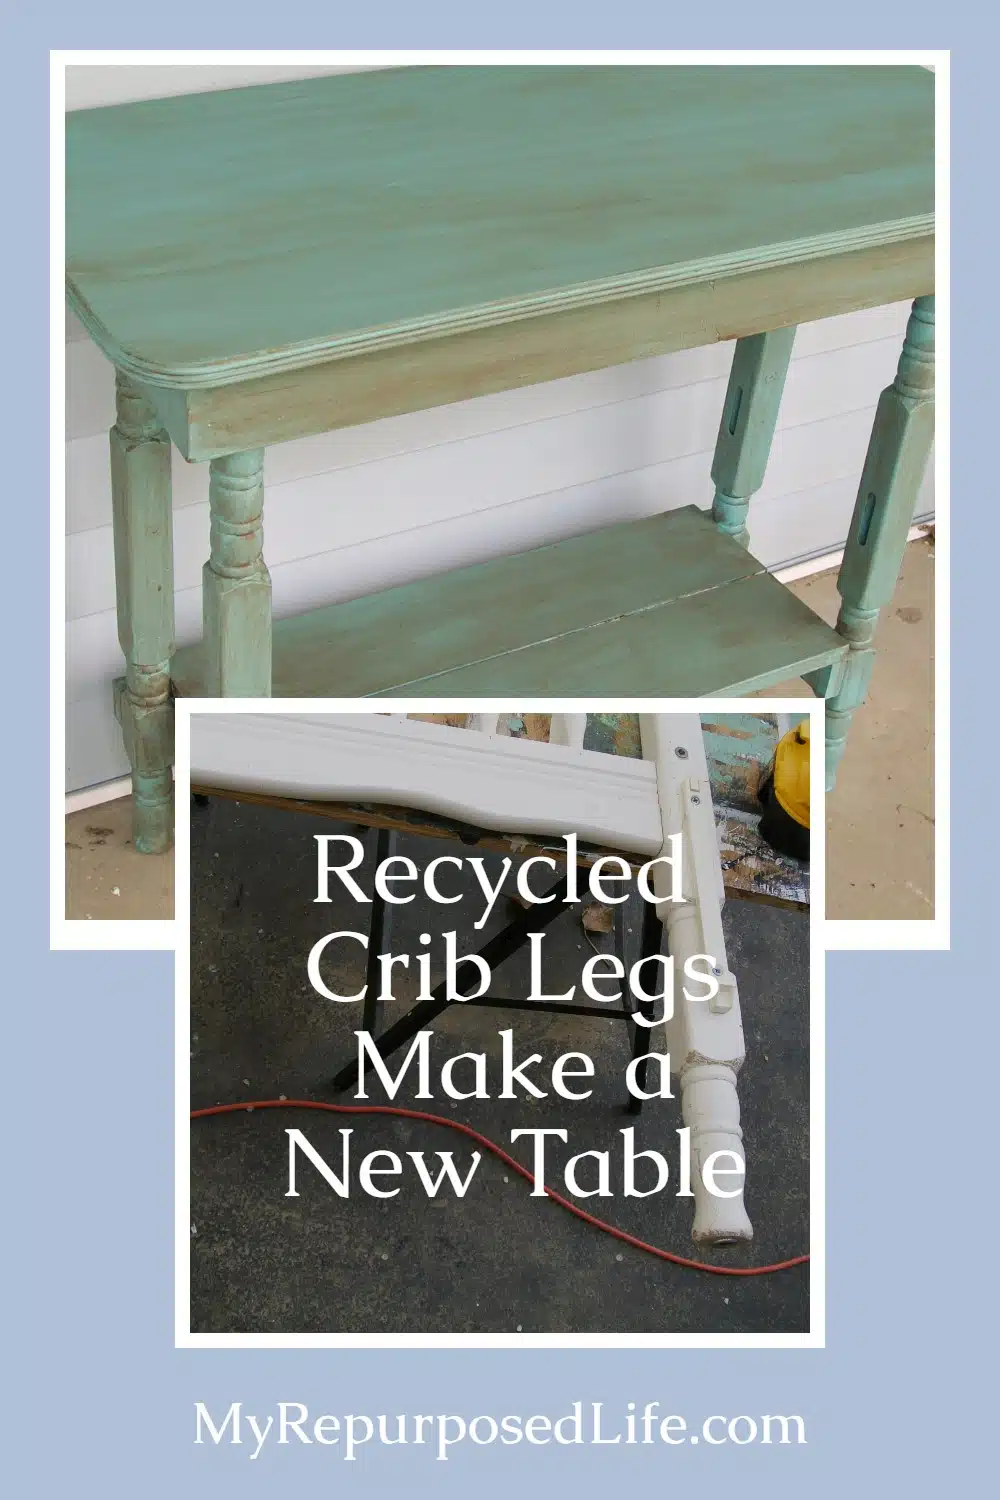 How to make a table using repurposed crib legs and hardware. Parting out old cribs is a great way to harvest materials for your next project. Never throw away the spindles or "L" brackets. This is an easy build using basic tools. #MyRepurposedLife #repurposed #furniture #crib #table #legs via @repurposedlife